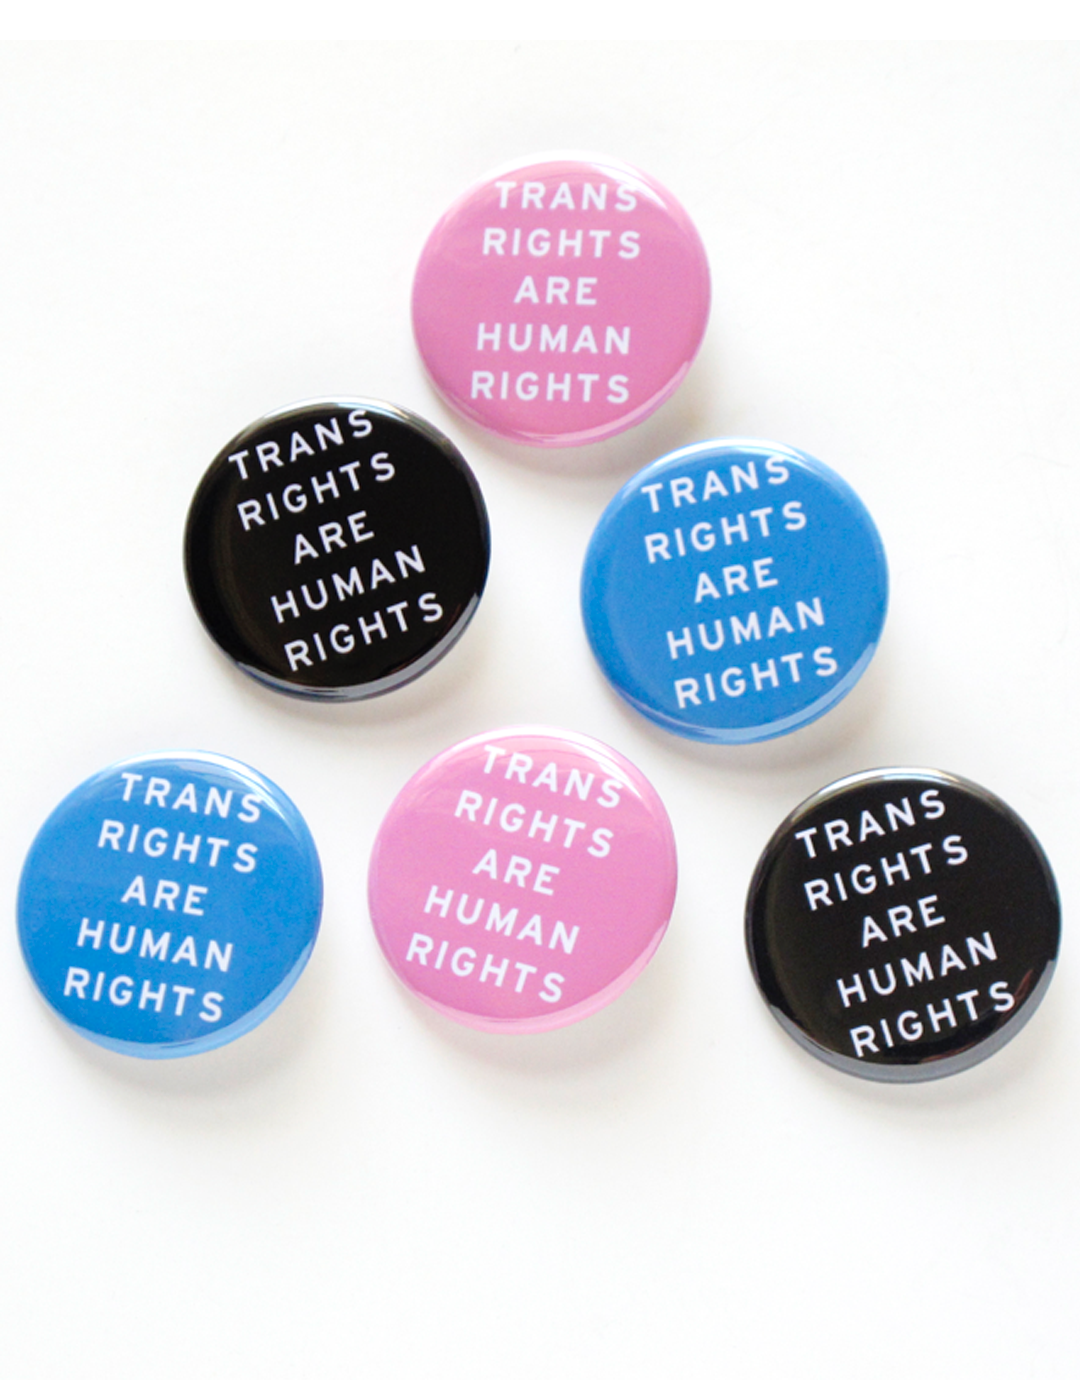 Trans Rights Are Human Rights pinback buttons